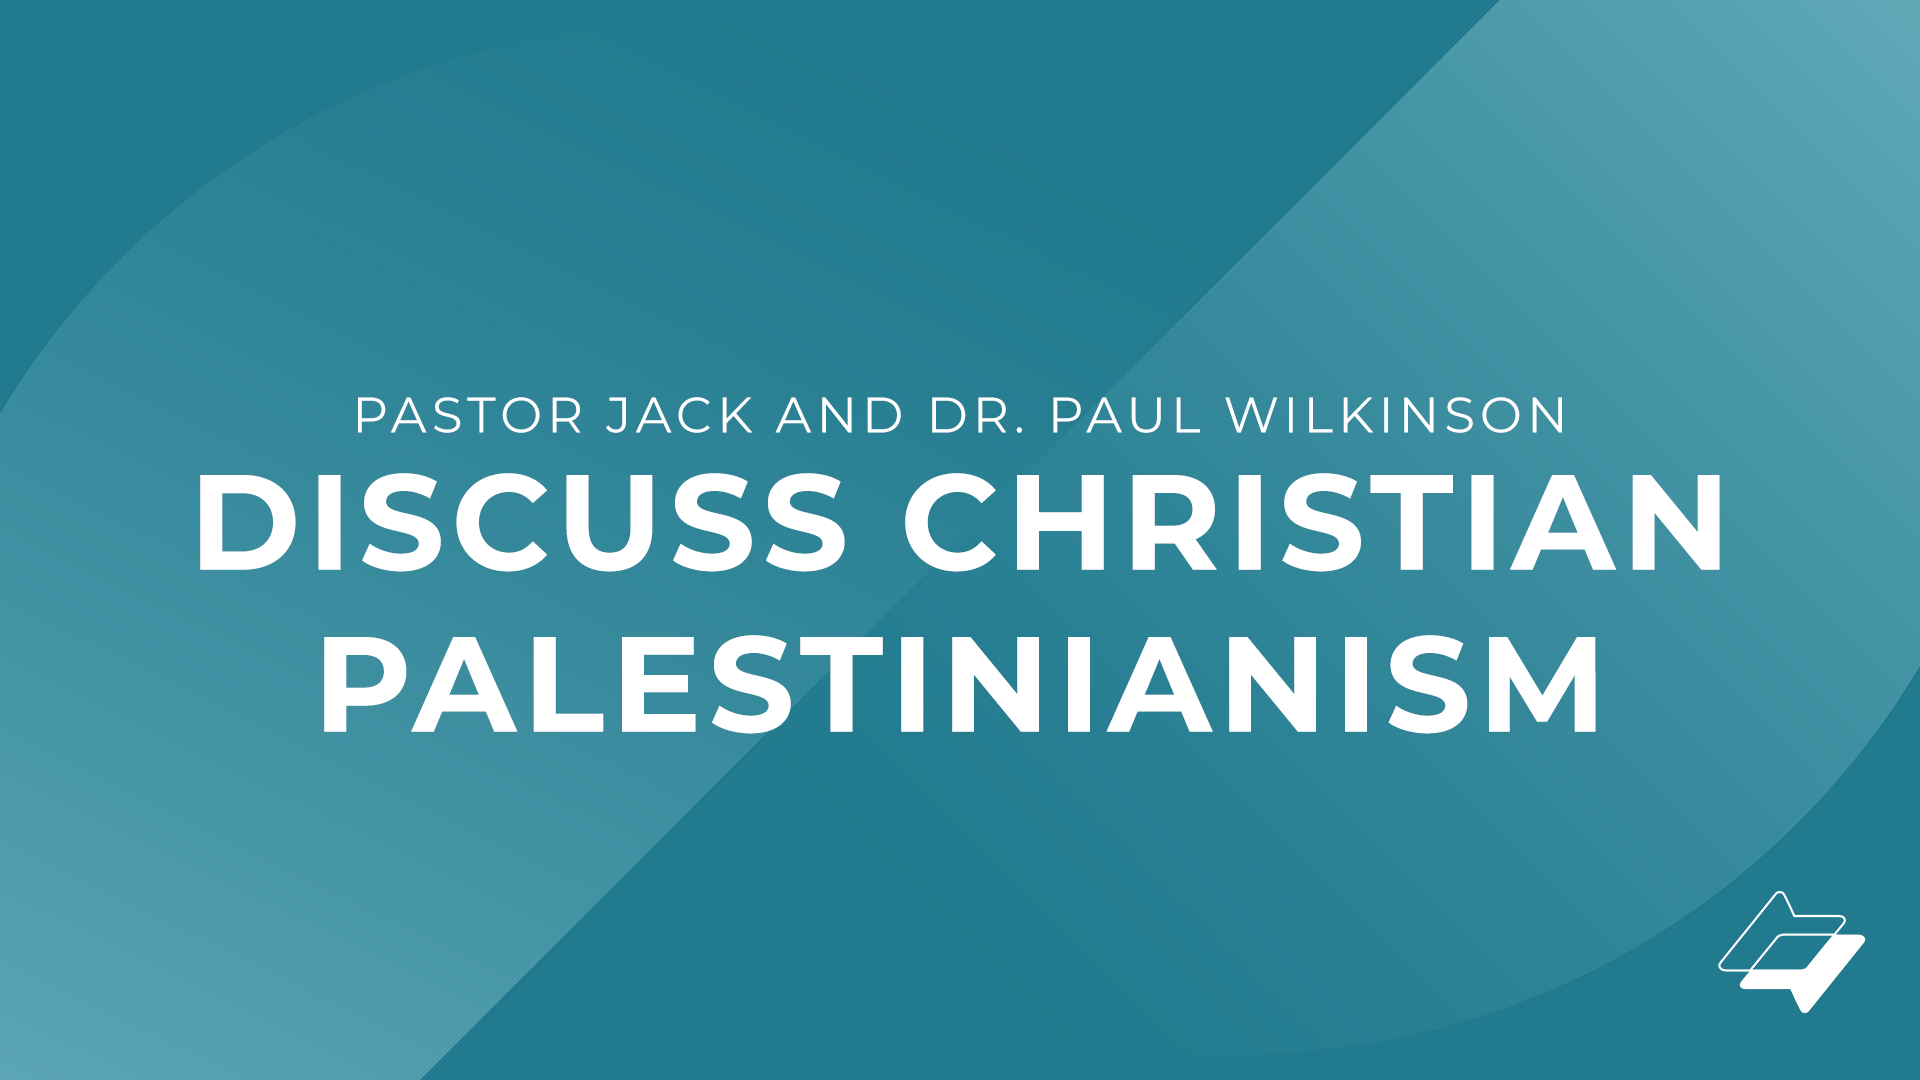 Pastor Jack and Dr. Paul Wilkinson discuss Christian Palestinianism